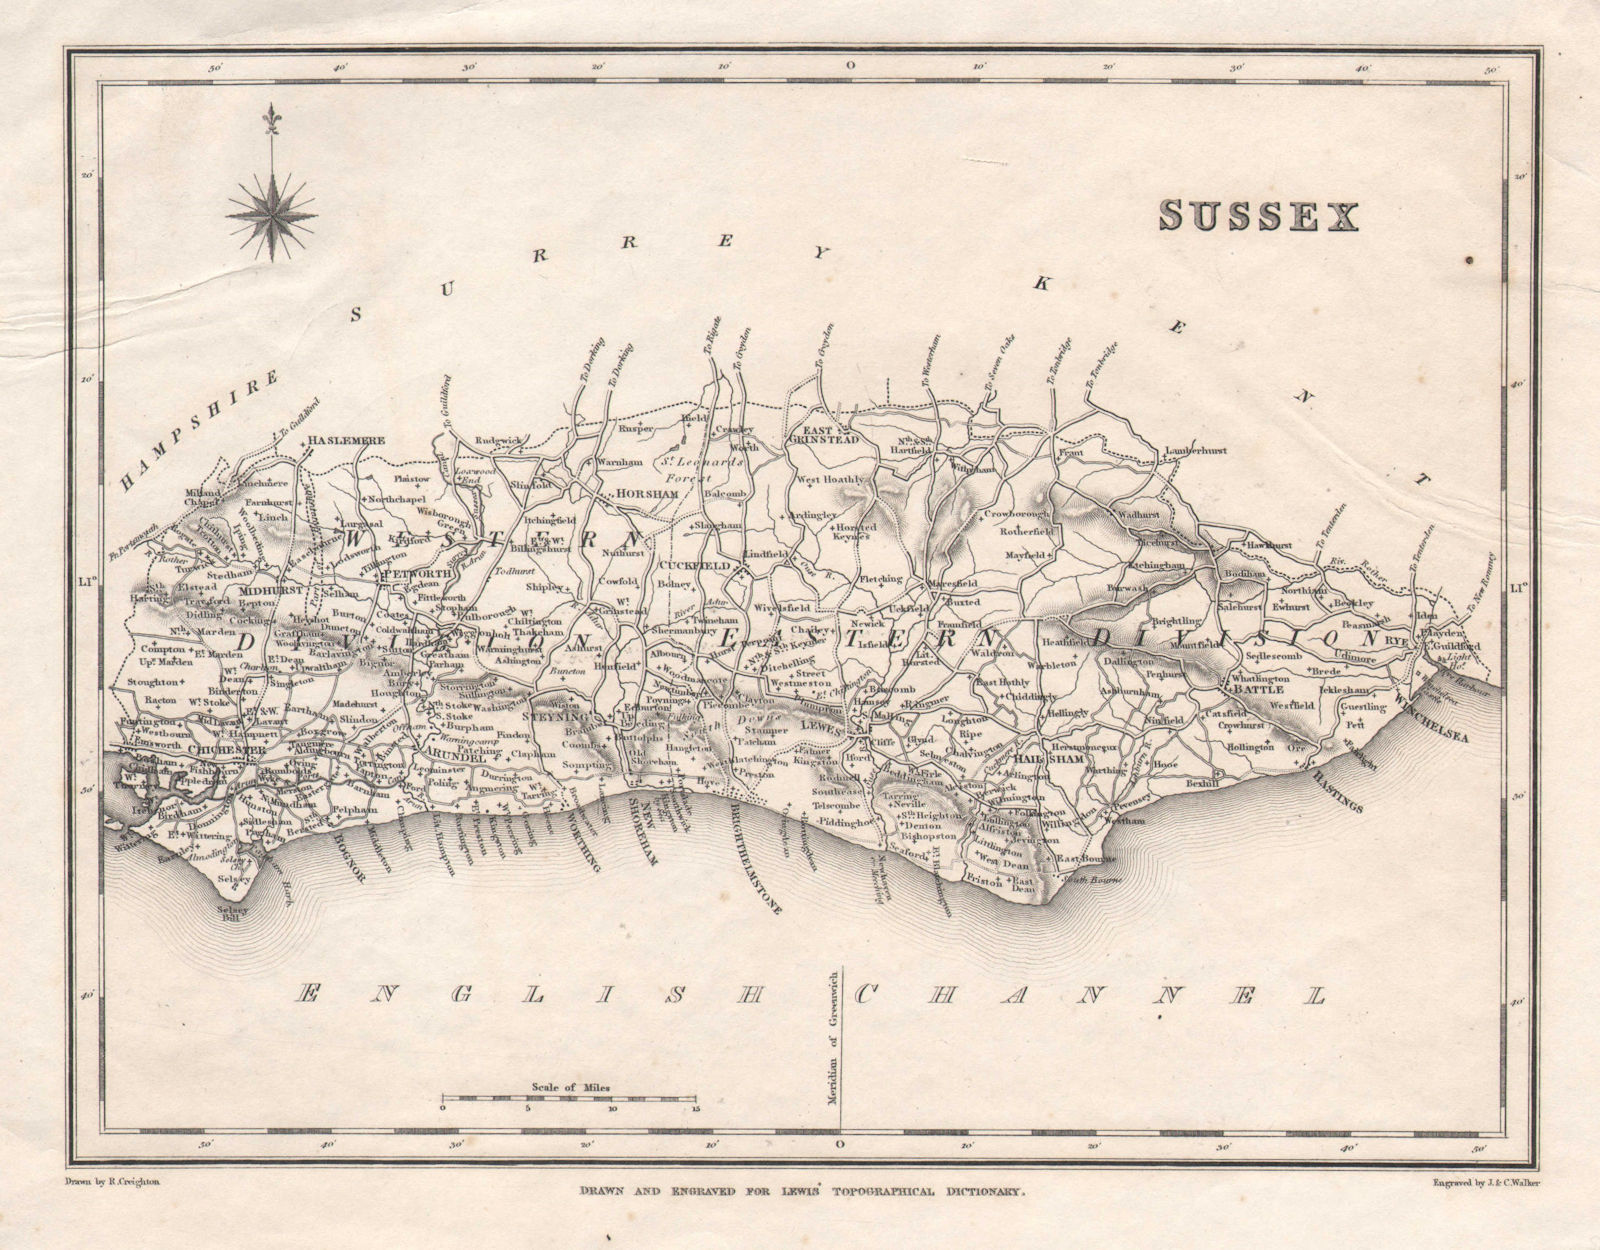 Associate Product Antique county map of SUSSEX by Walker & Creighton for Lewis. Light crease c1840